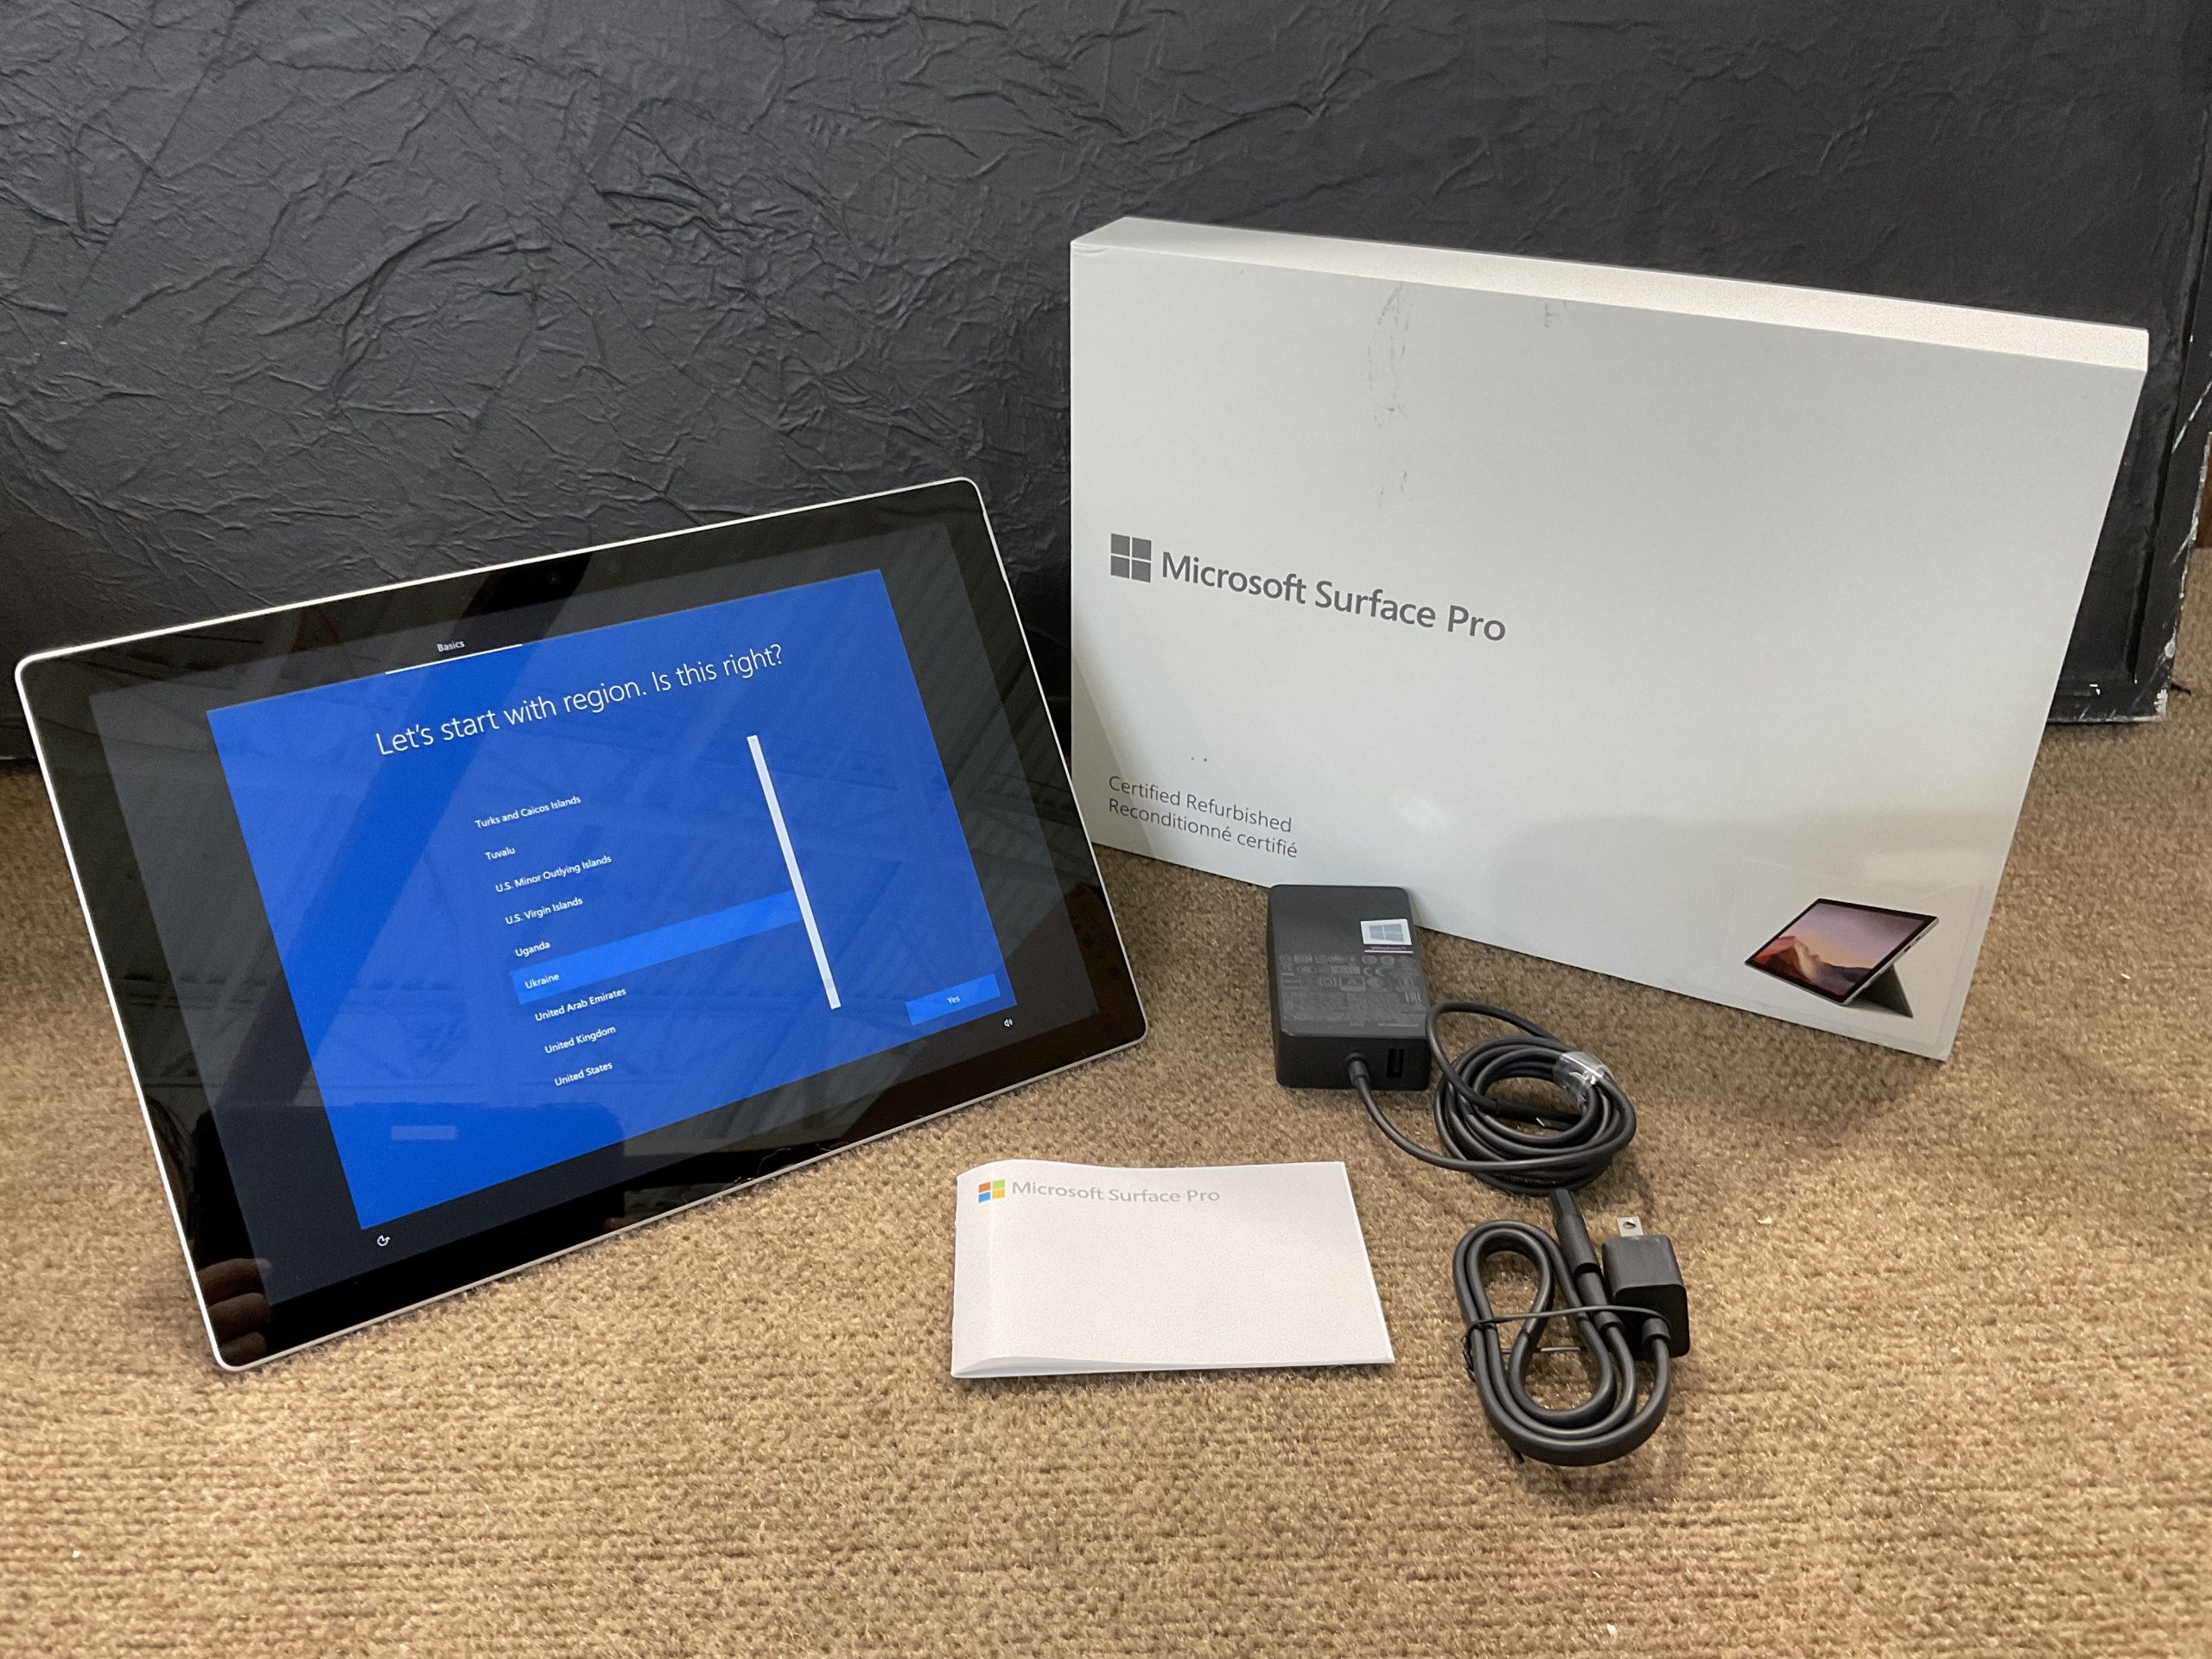 Microsoft Surface Pro 7 i3-1005G1 4GB/128GB/12.3T/W10P – Electronics  Outlet: Open Box New & NEW Electronics, TV's, Computers, Tablets, Printers  and Networking Gear